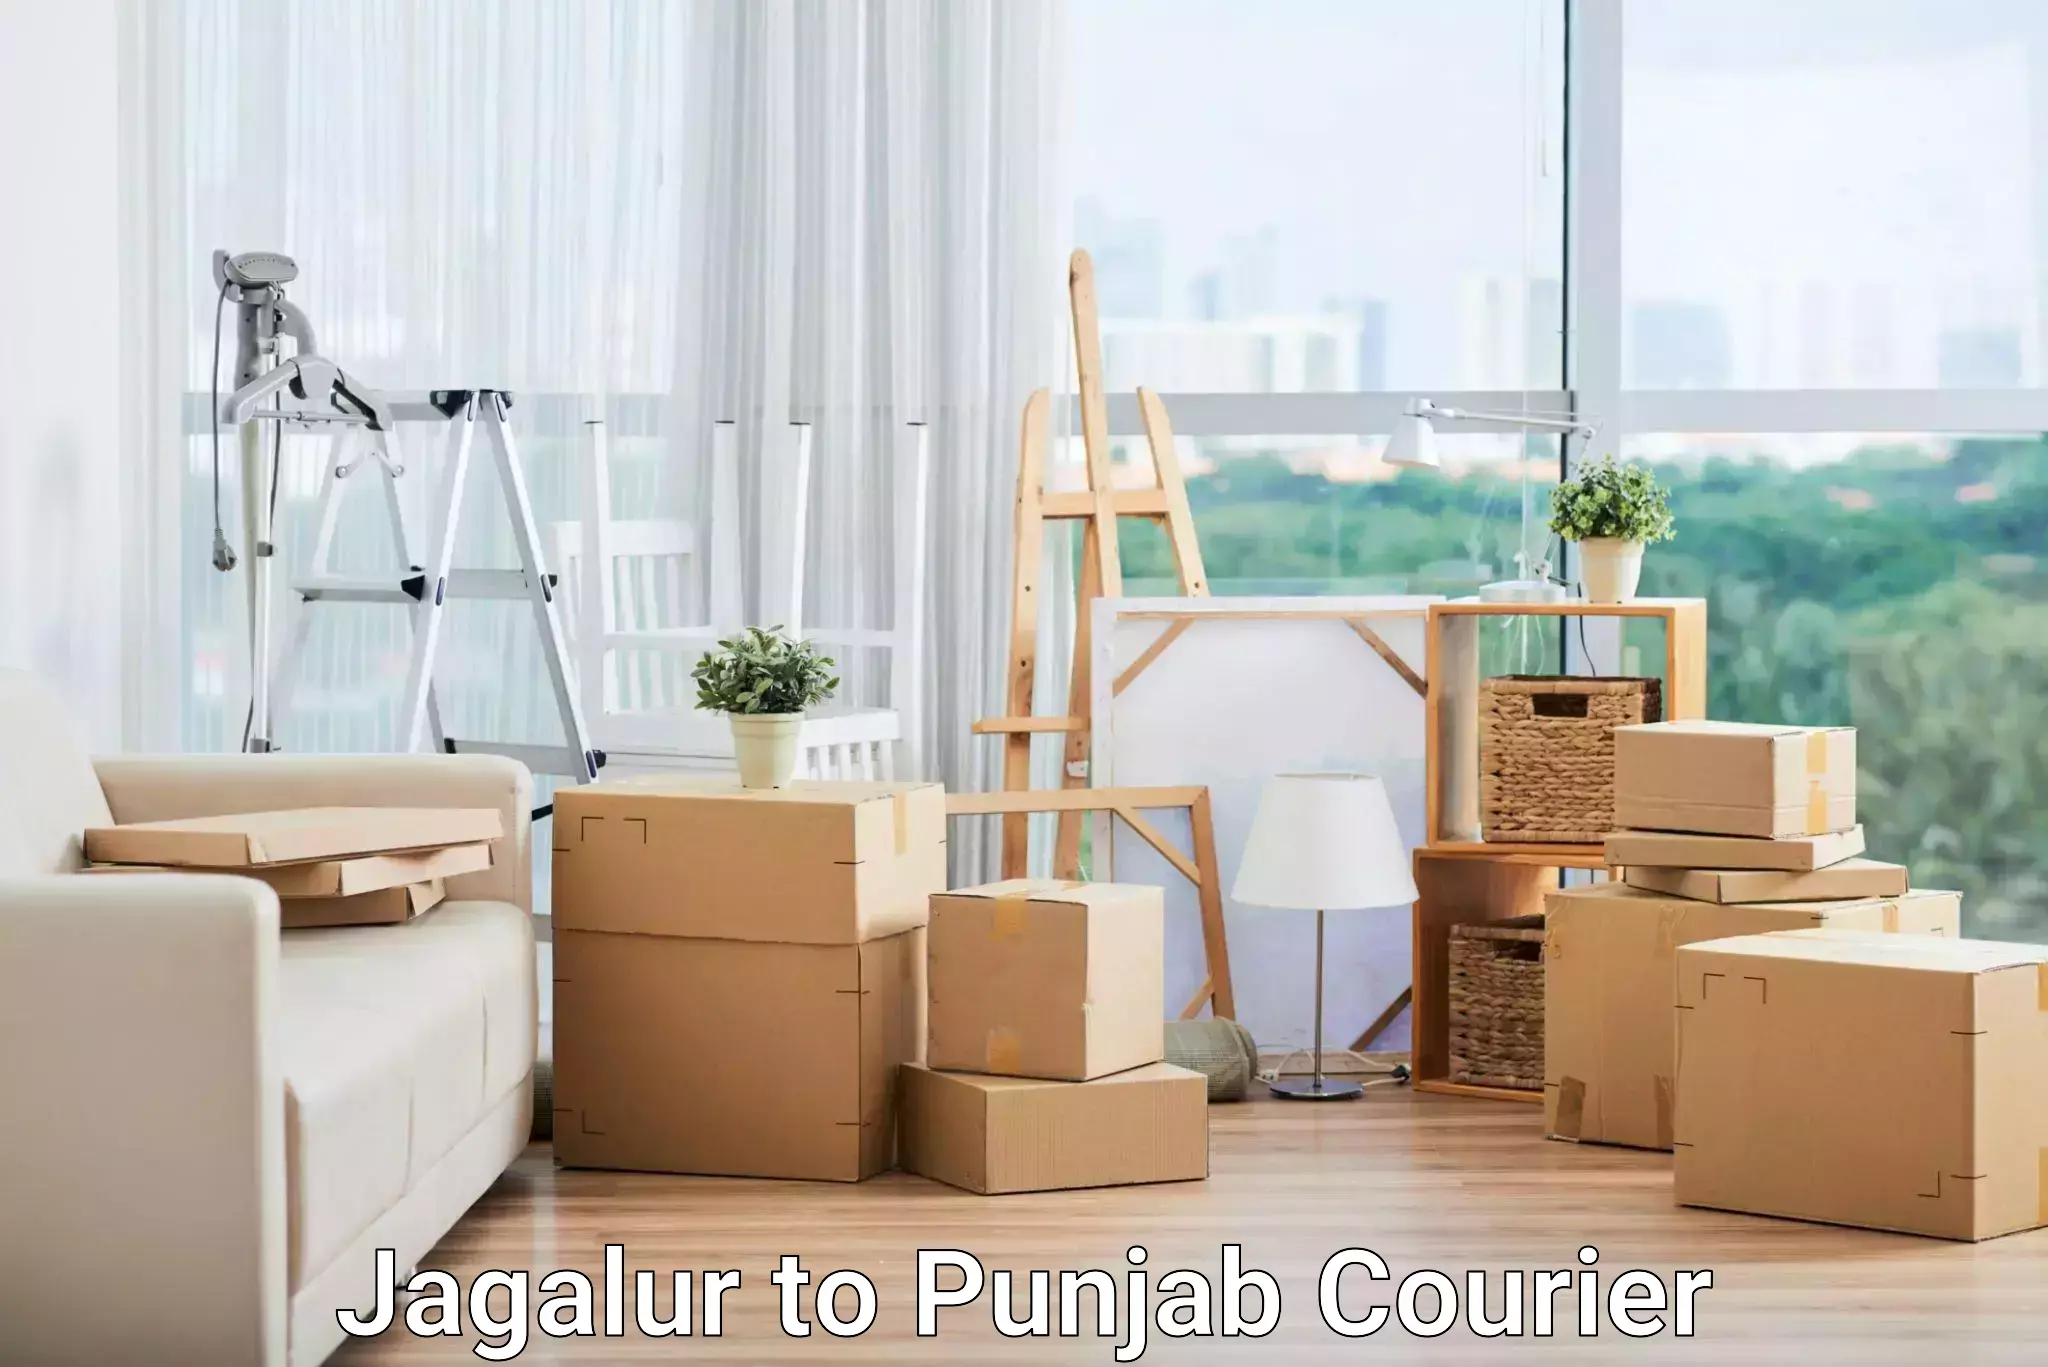 Rural area delivery Jagalur to Punjab